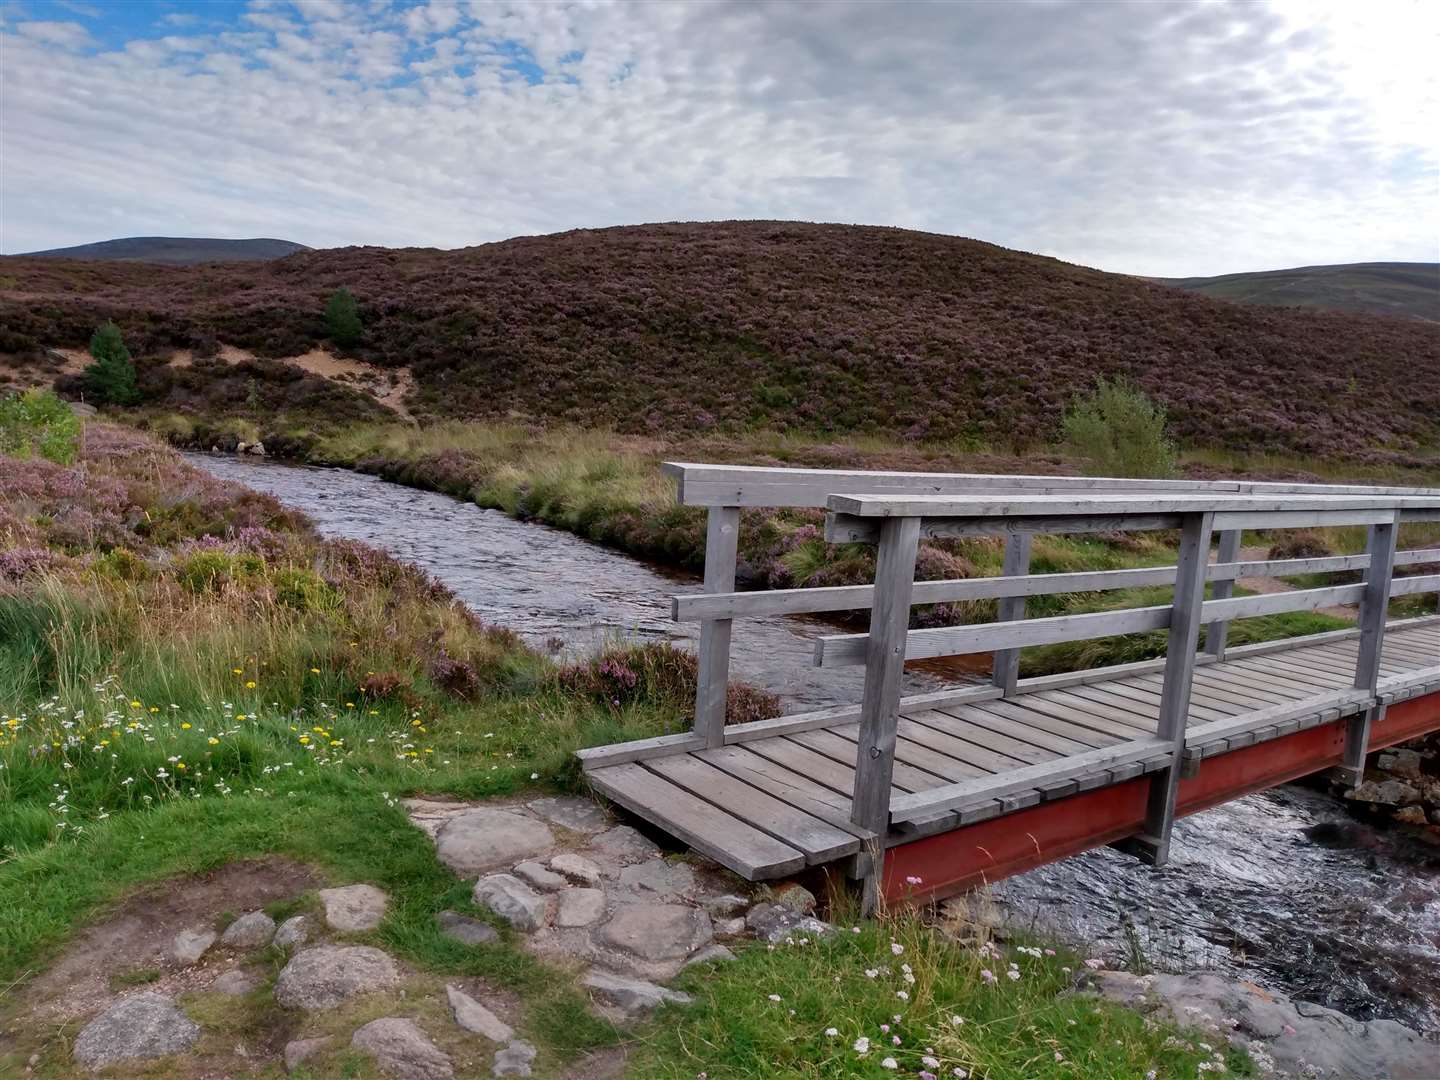 The bridge at Bynack Stables.